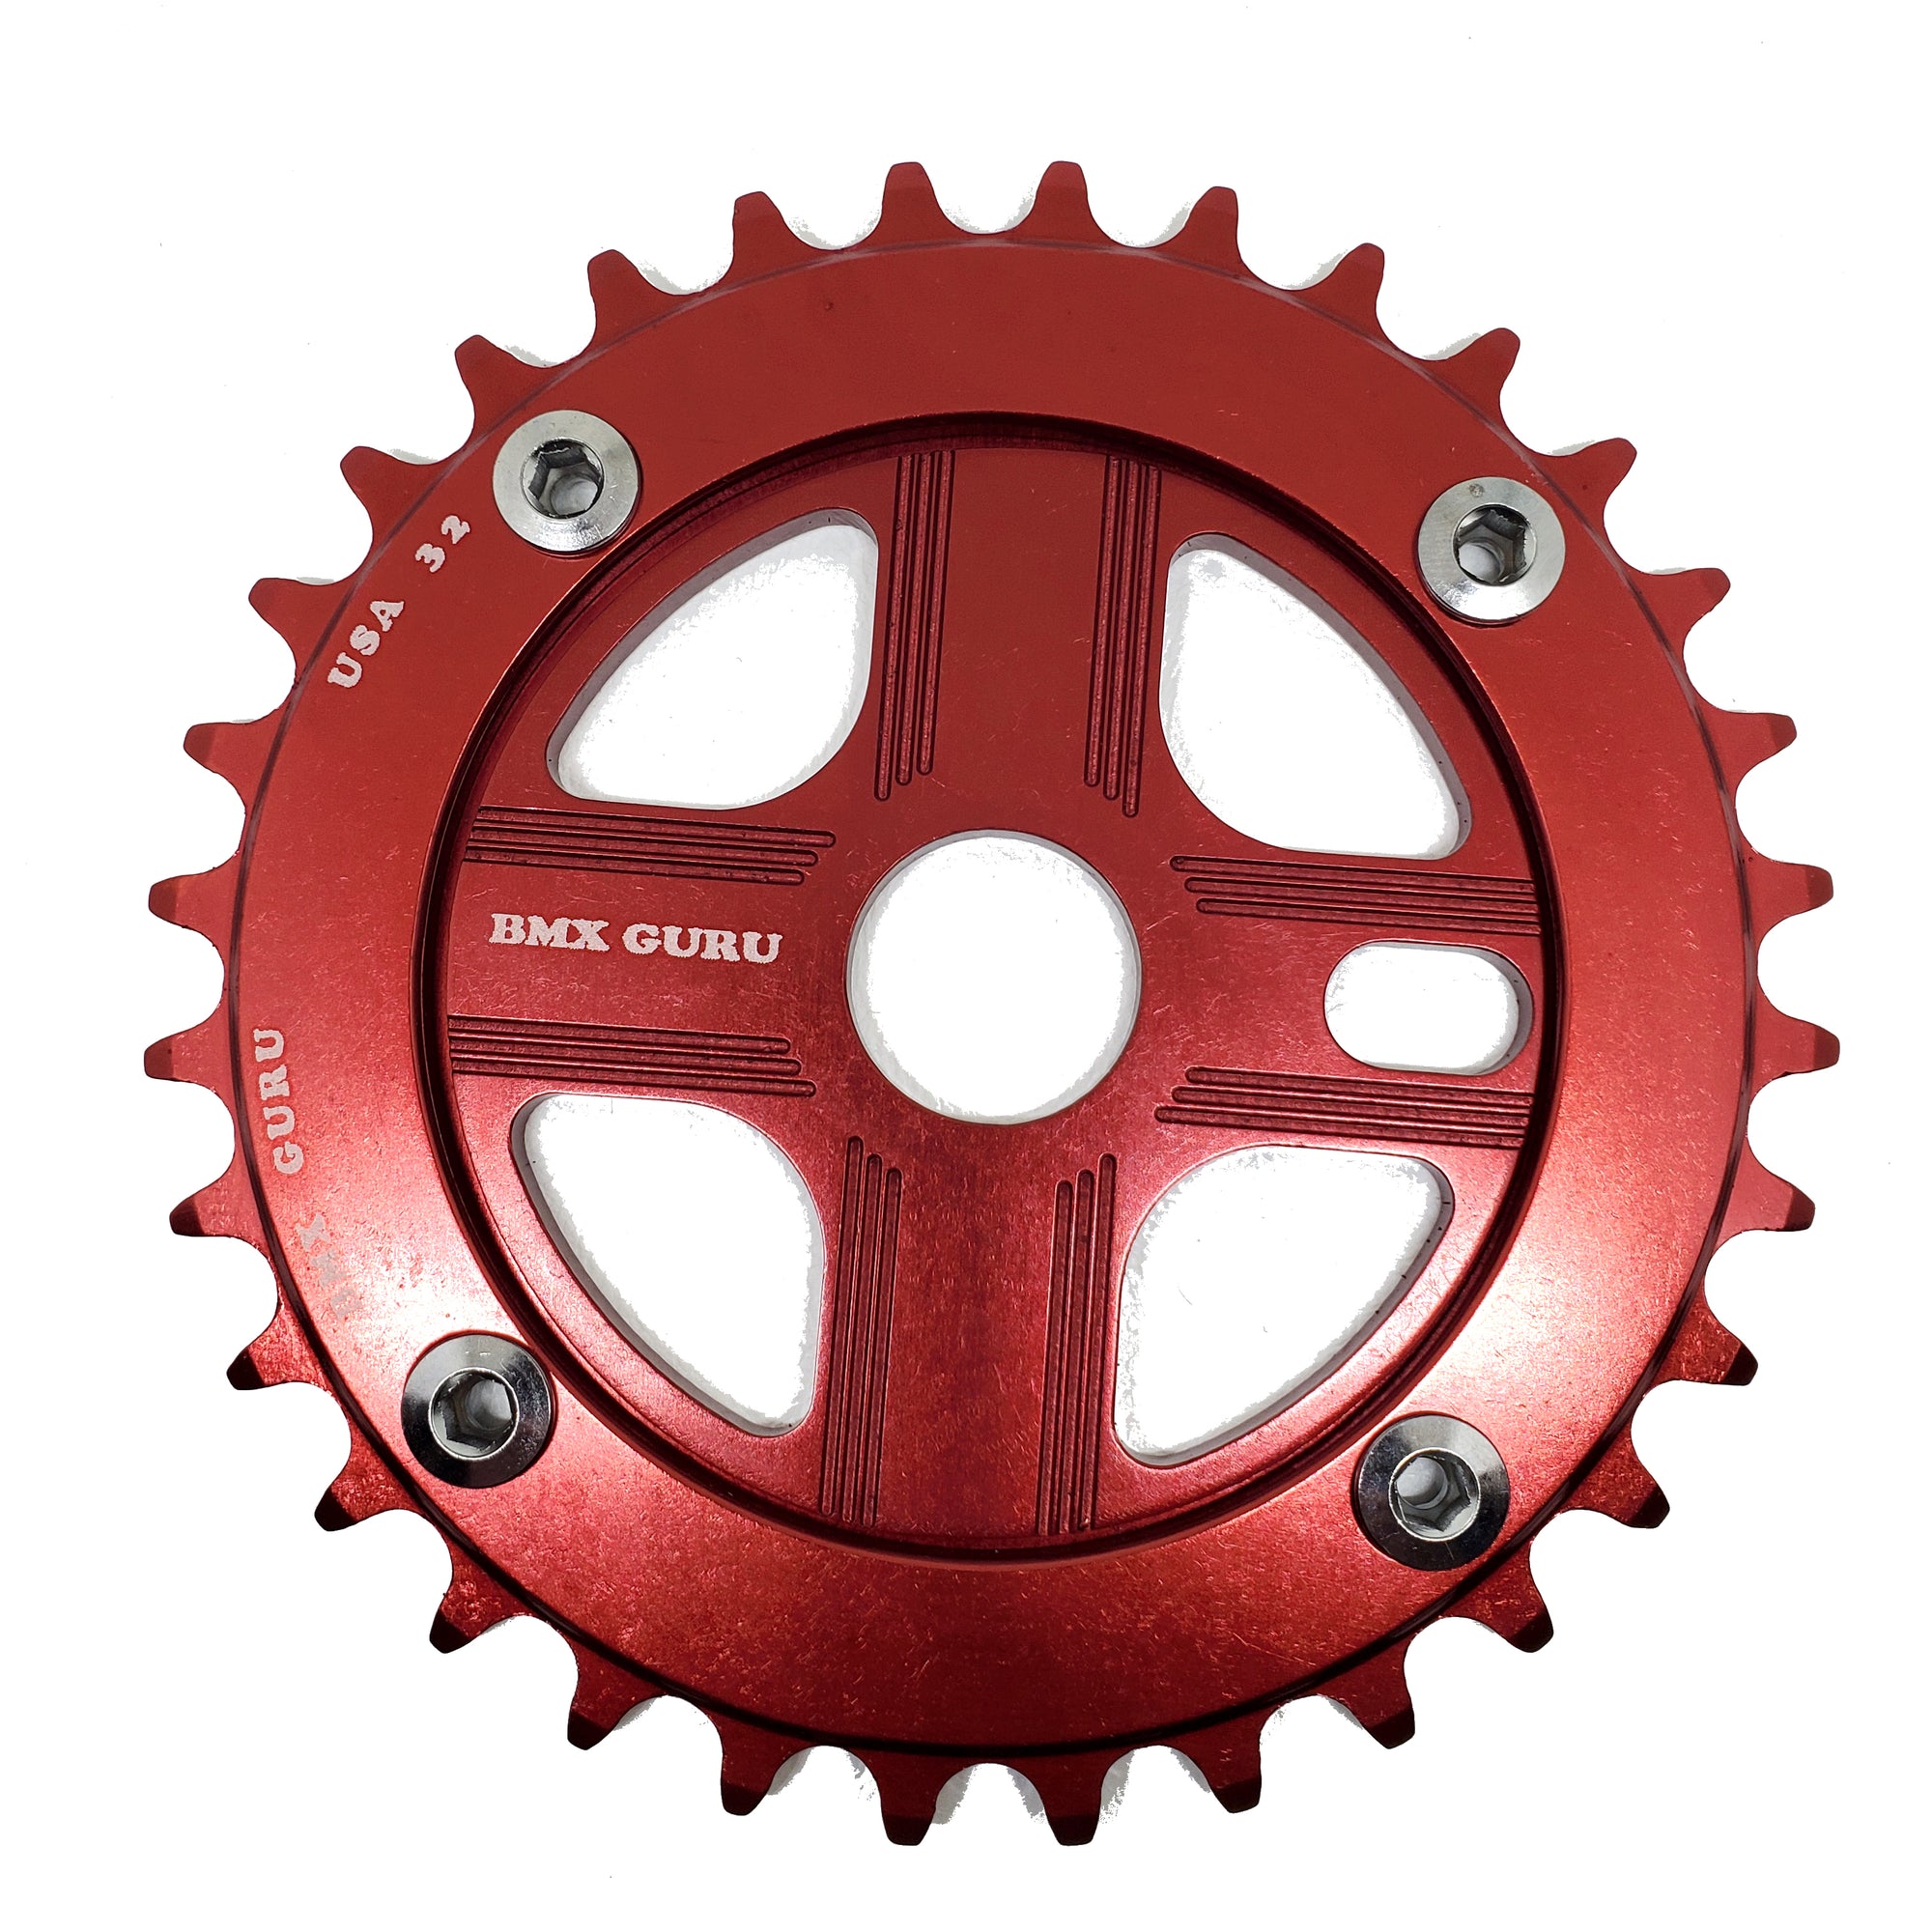 BMXGuru 32T Aluminum Spider & 4-bolt Chainring Combo - Red over Red - USA Made